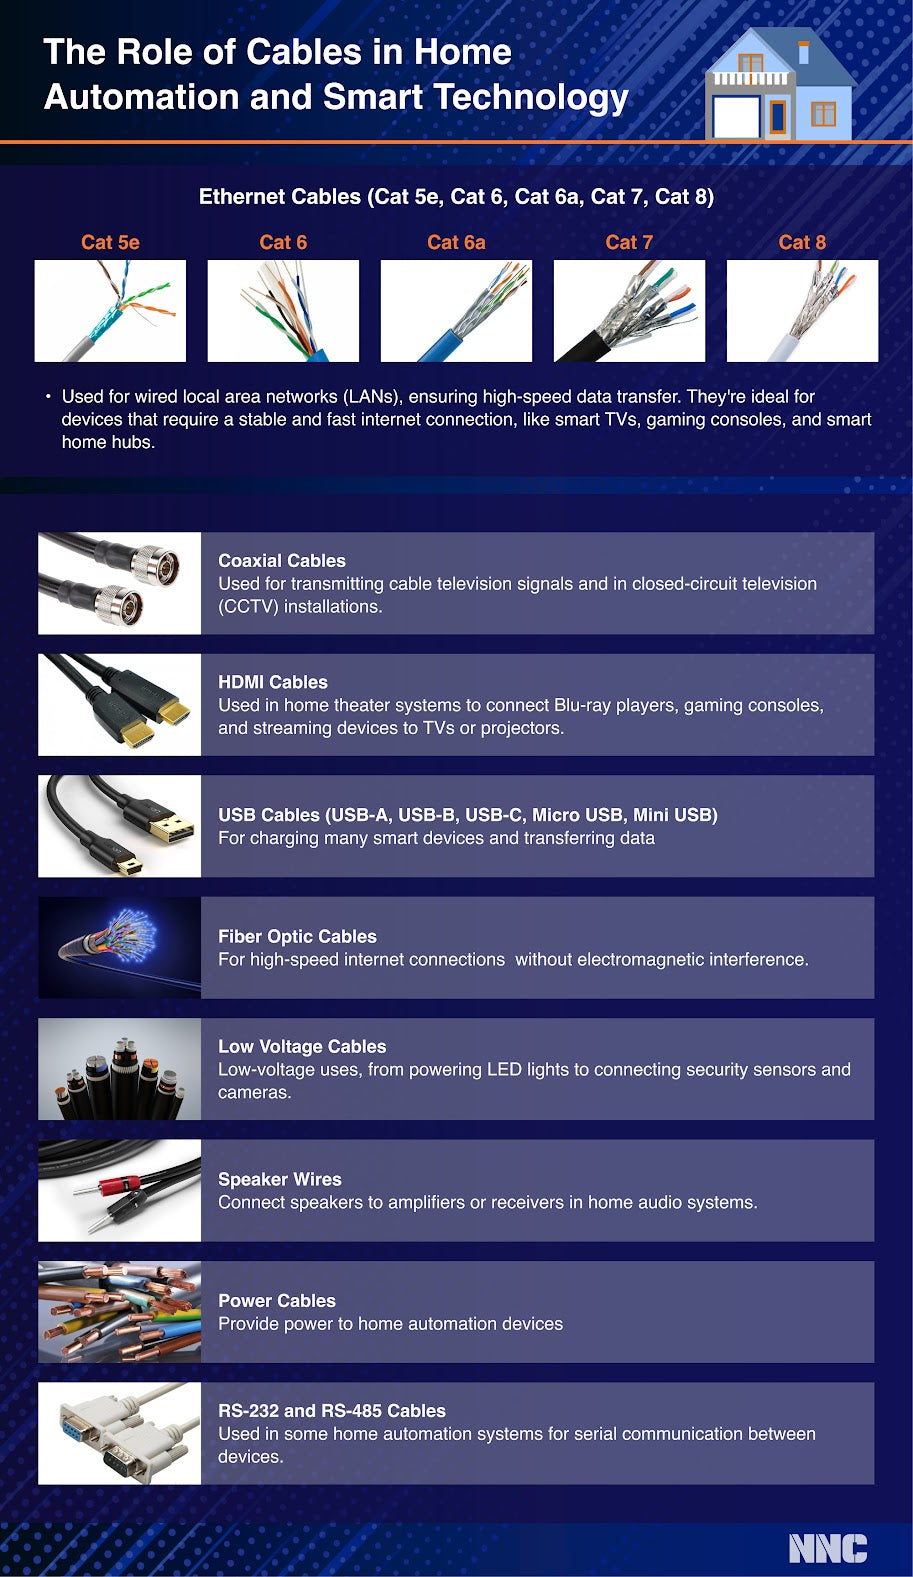 home automation cables, smart technology cables, coaxial cables